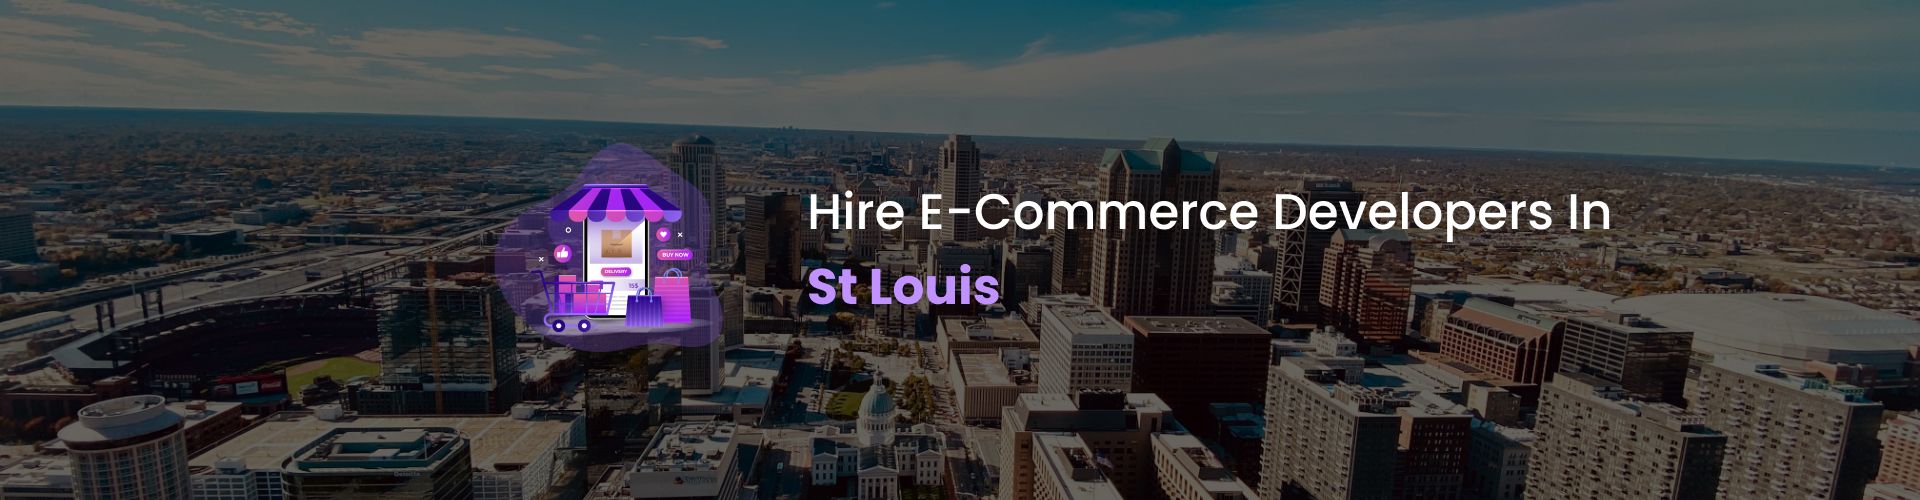 hire ecommerce developers in st louis